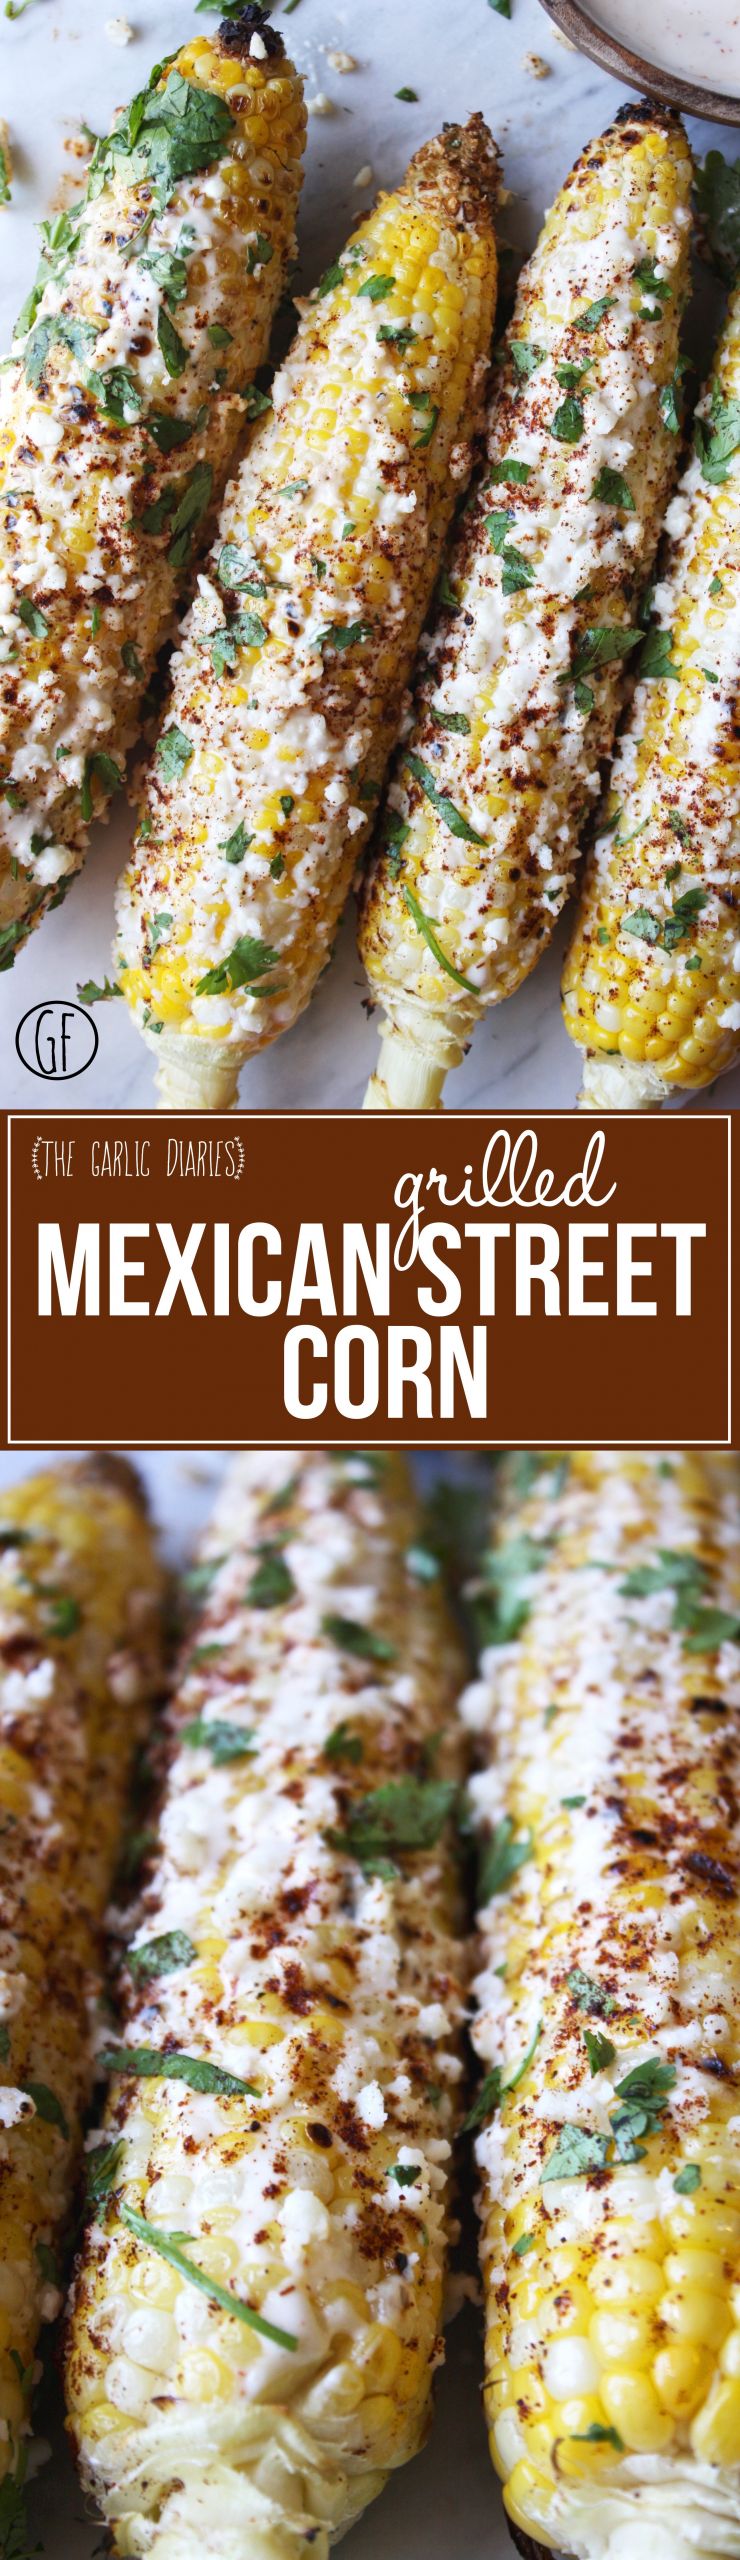 Grilled Mexican Street Corn
 Grilled Mexican Street Corn